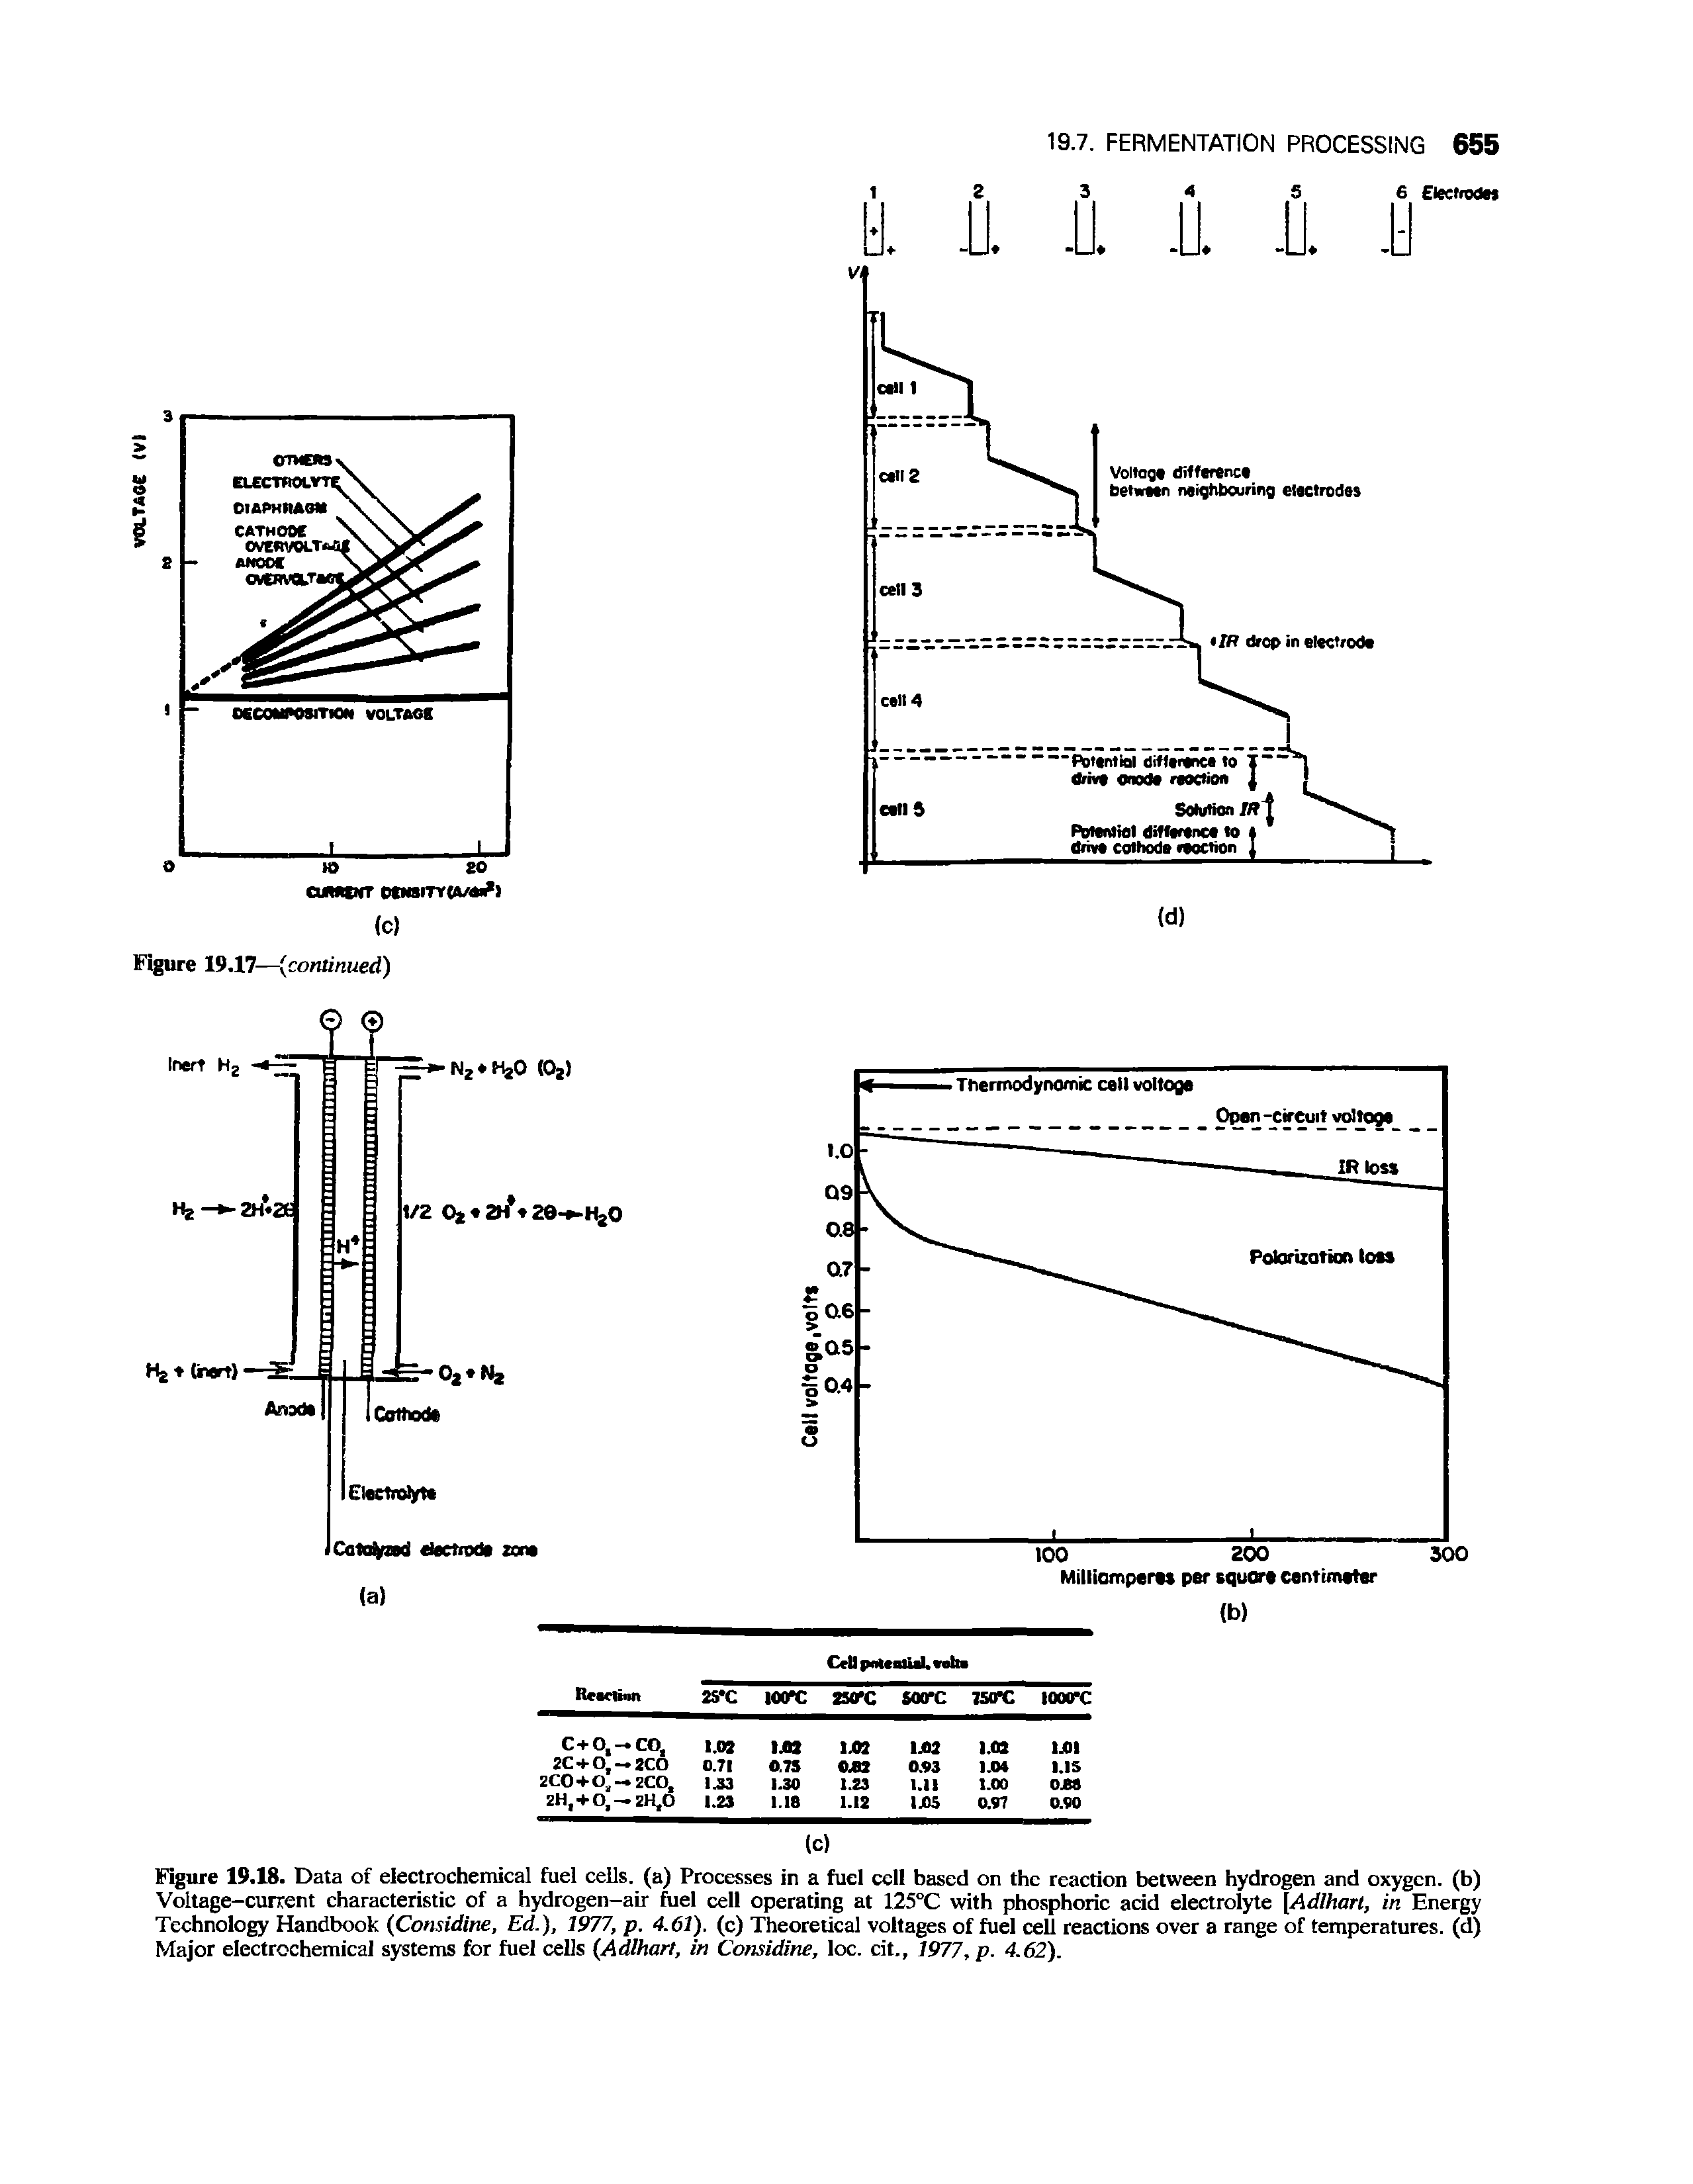 Figure 19.18. Data of electrochemical fuel cells, (a) Processes in a fuel cell based on the reaction between hydrogen and oxygen, (b) Voltage-current characteristic of a hydrogen-air fuel cell operating at 125°C with phosphoric acid electrolyte [Adlharl, in Energy Technology Handbook (Considine, Ed.), 1977, p. 4.61). (c) Theoretical voltages of fuel cell reactions over a range of temperatures, (d) Major electrochemical systems for fuel cells (Adlharl, in Considine, loc. cit., 1977, p. 4.62).